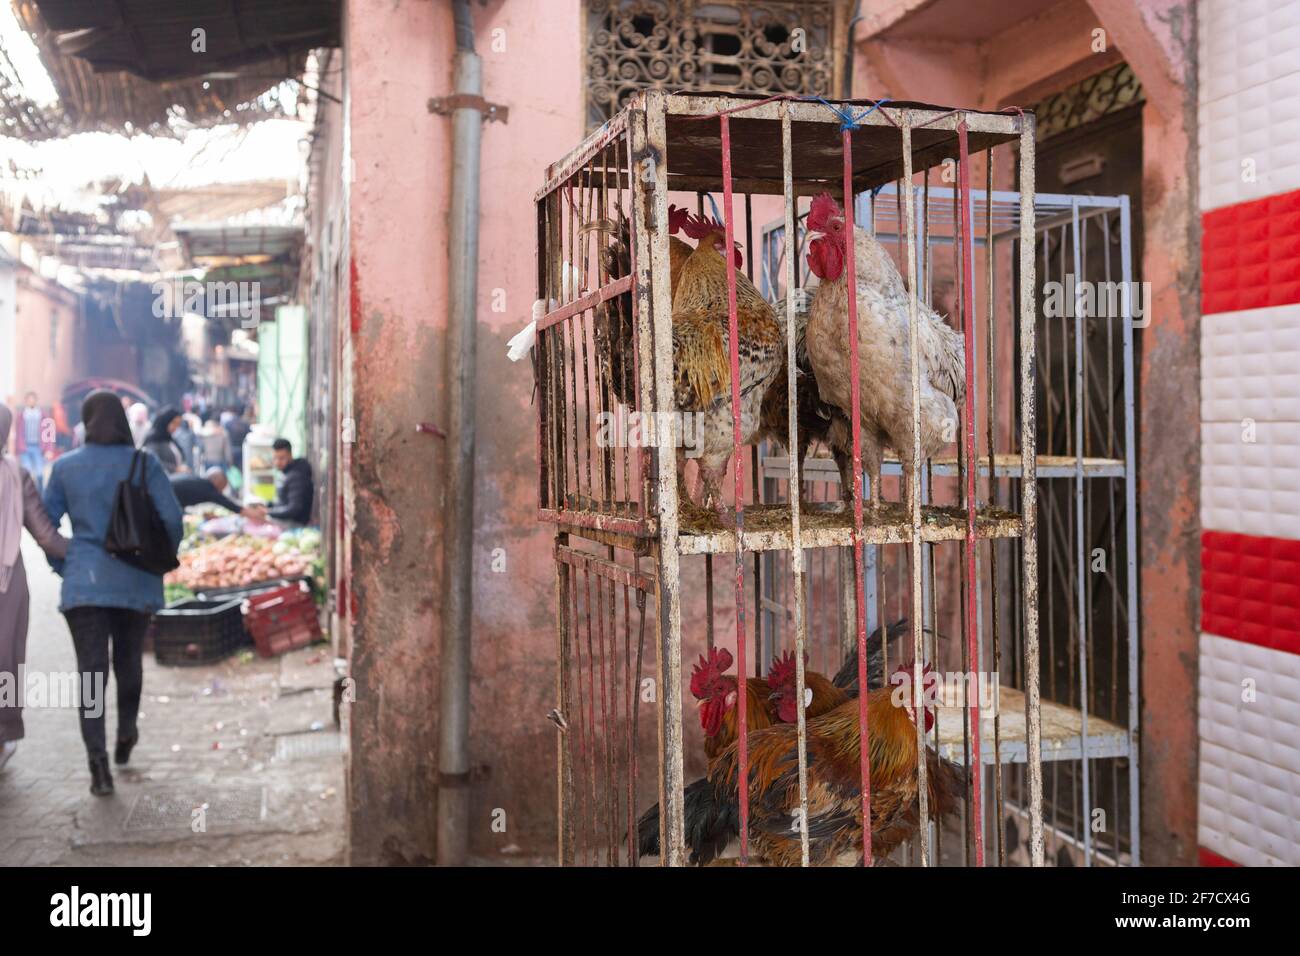 Chickens in a cage at a market stand in the souks of Marrakech, Morocco  Stock Photo - Alamy